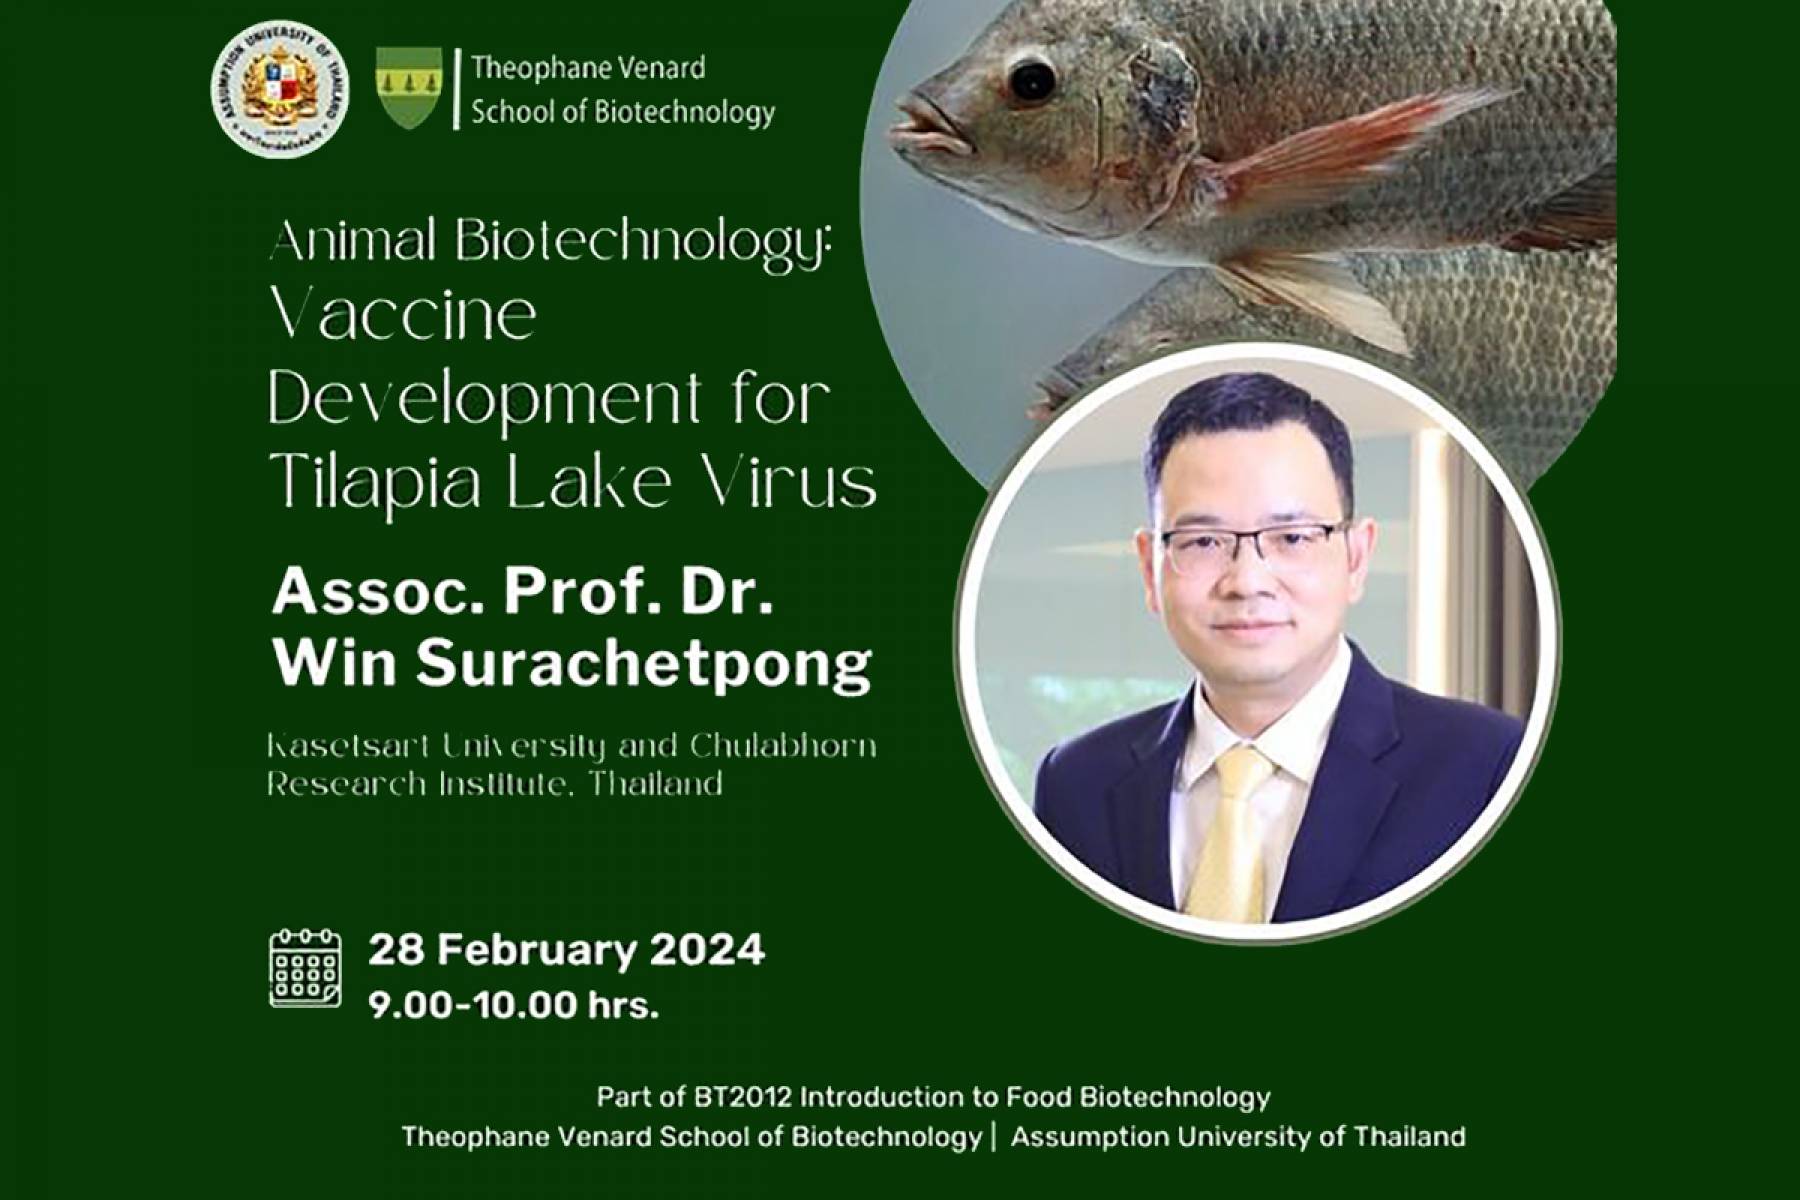 Fishing for Insights? Bait no More with Dr. Win's Talk!